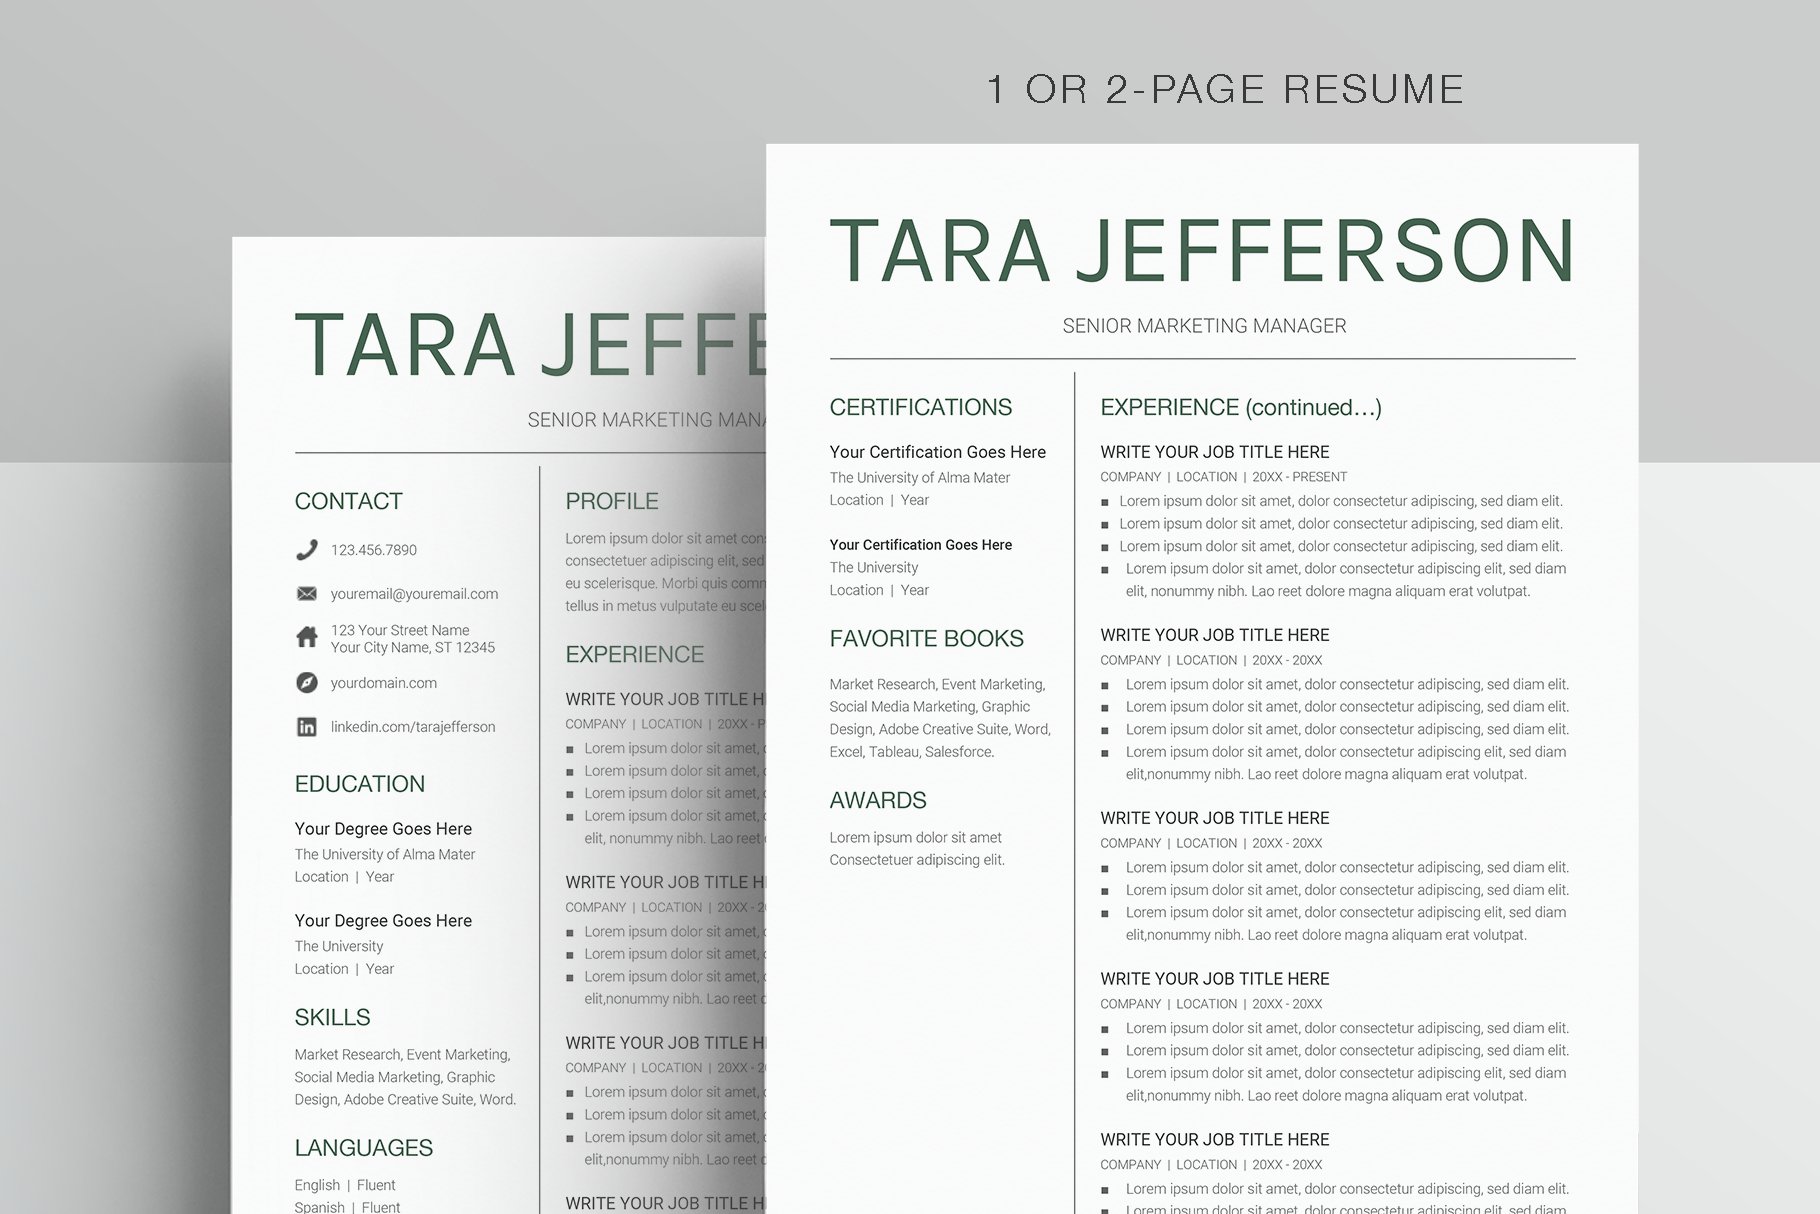 Google Docs Resume Template preview image.